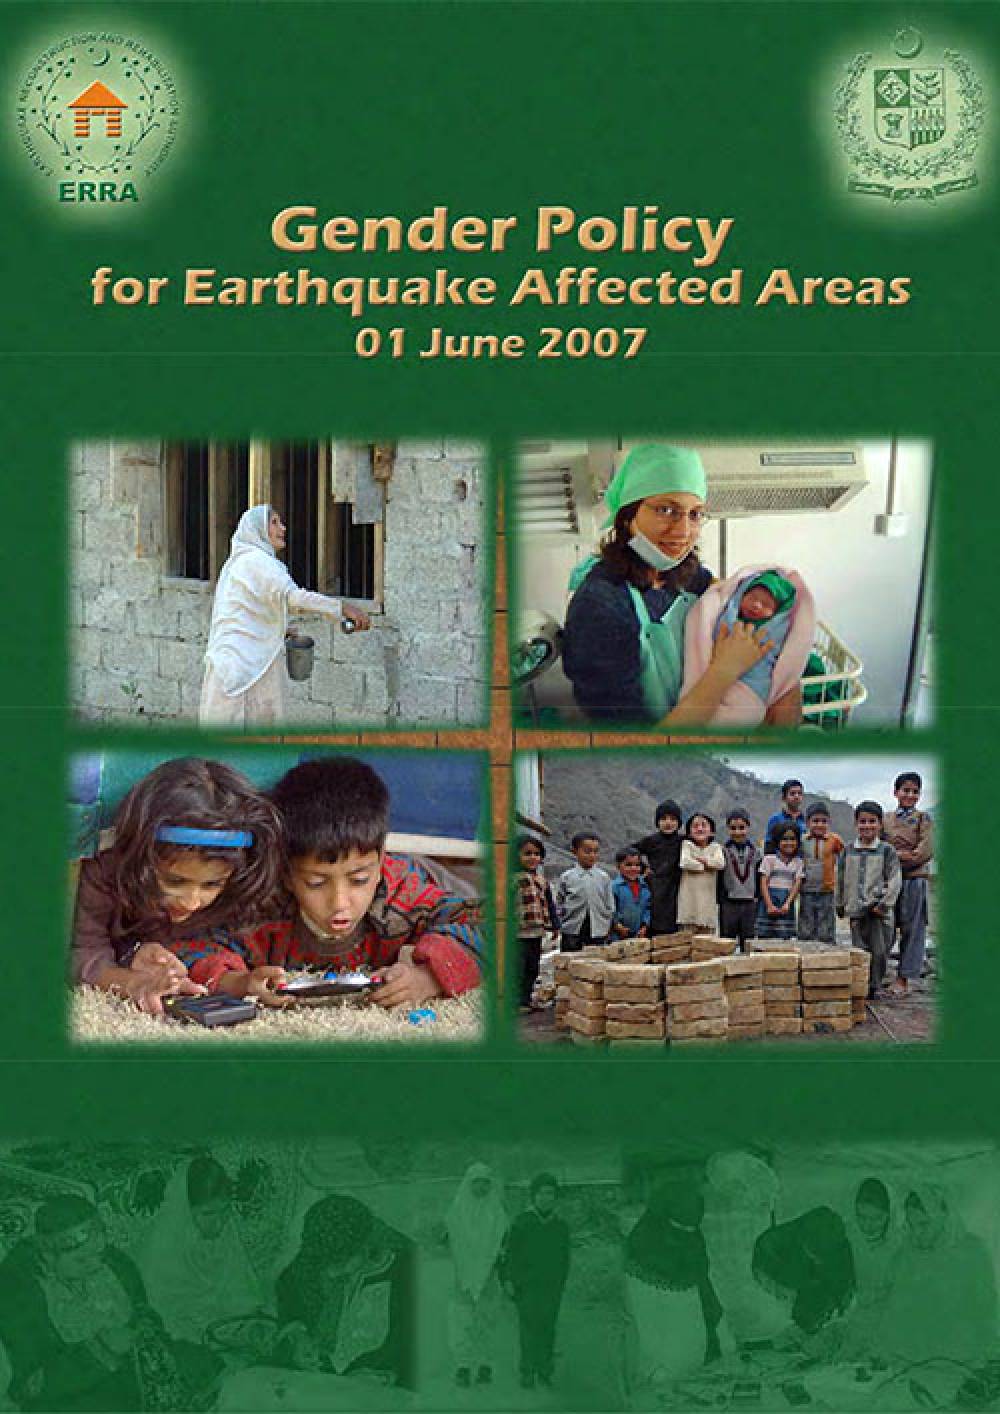 Gender Policy for Earthquake Affected Areas